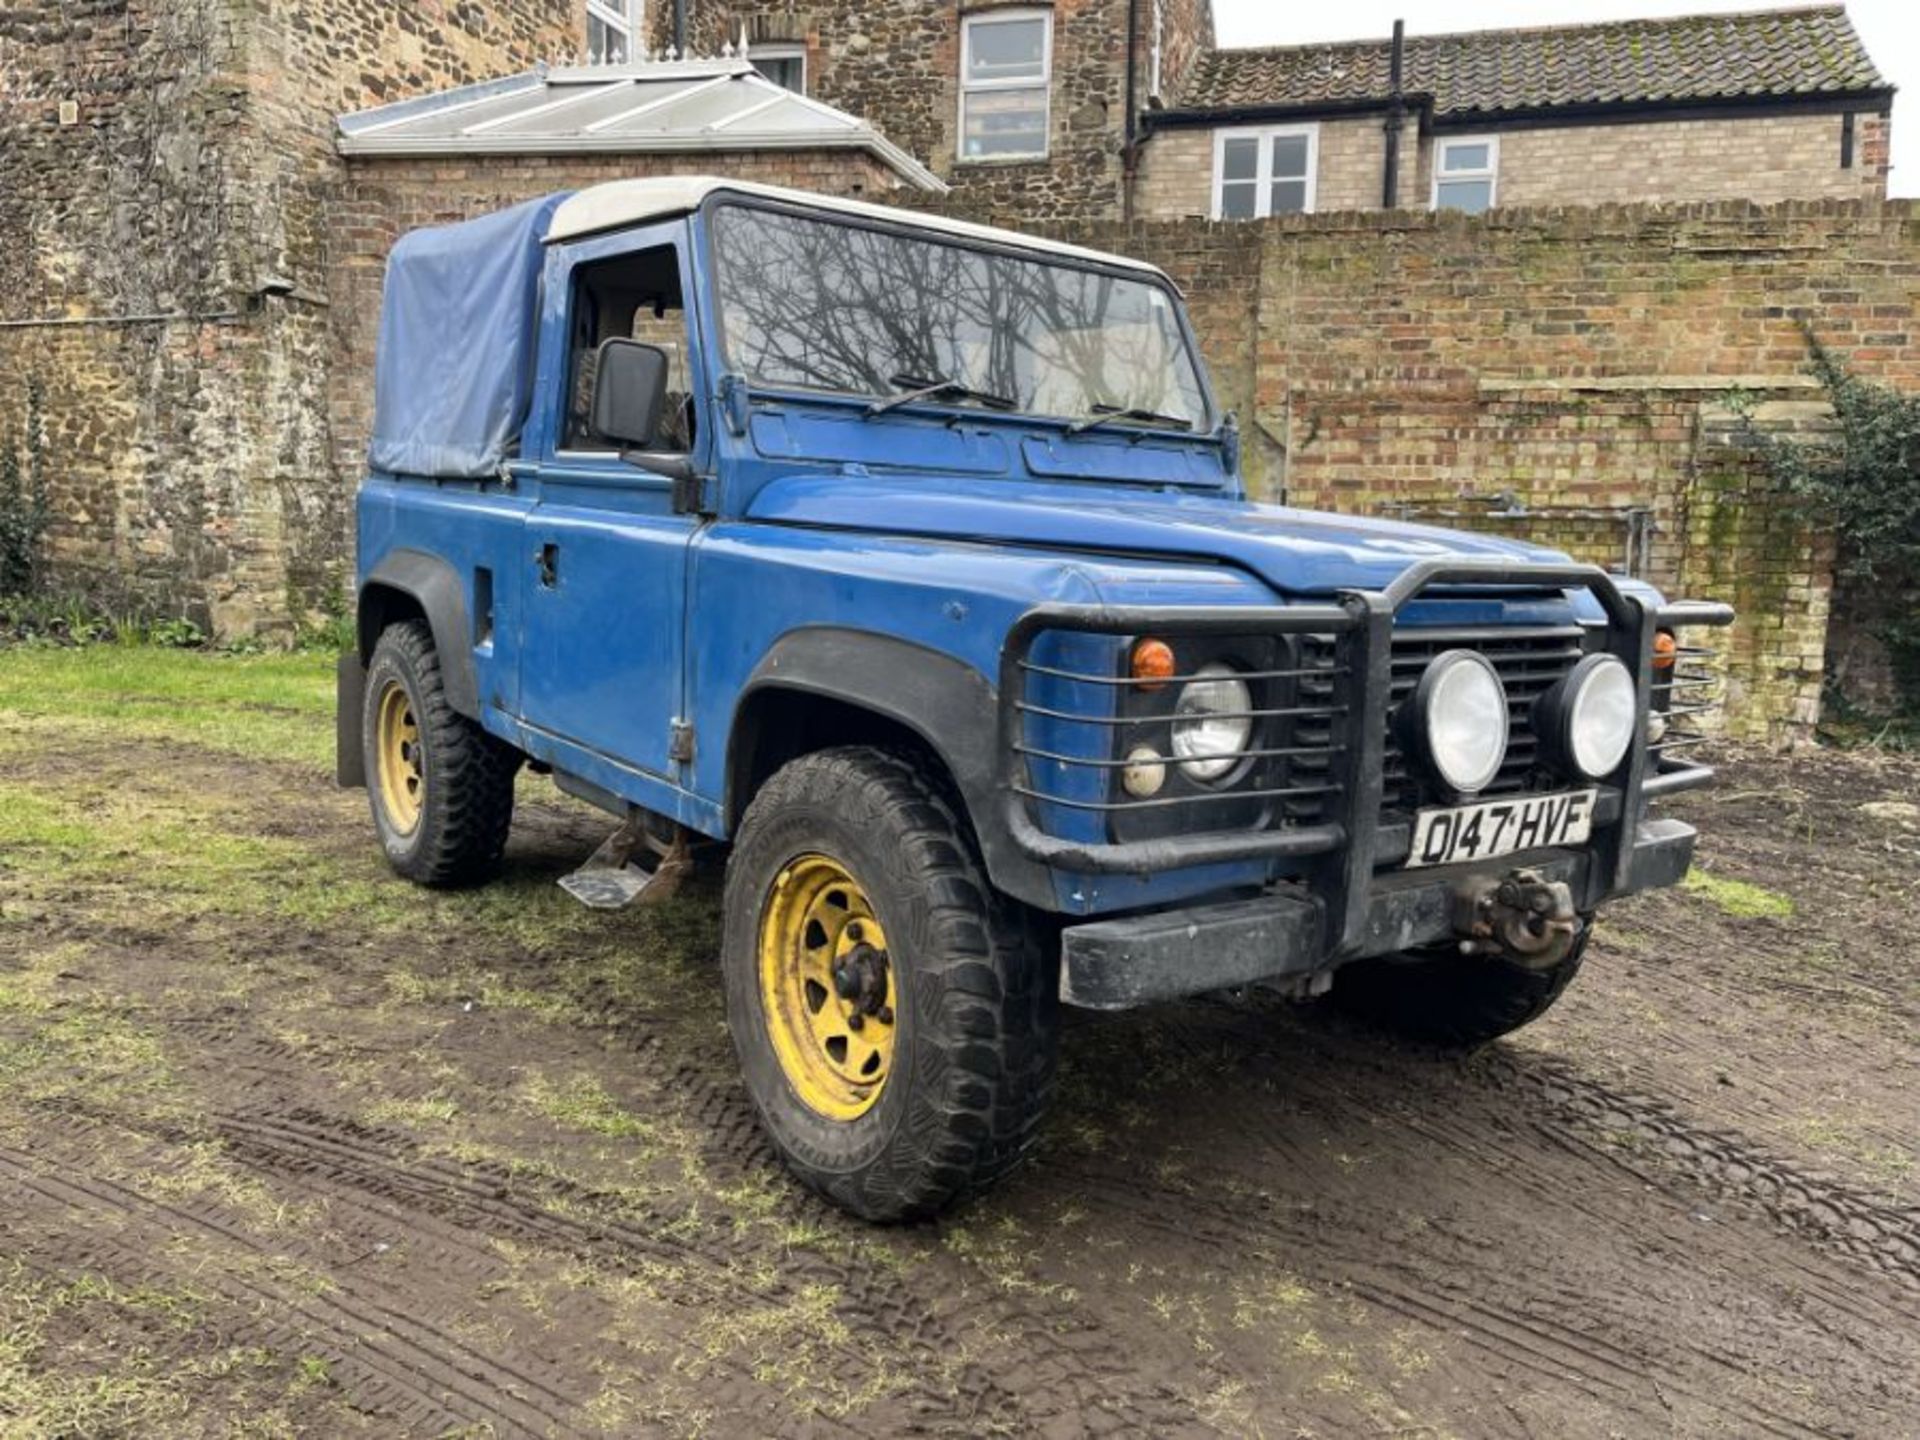 1992 Land Rover Defender, SWB pickup, blue complete with spare wheels and a heavy duty winch in